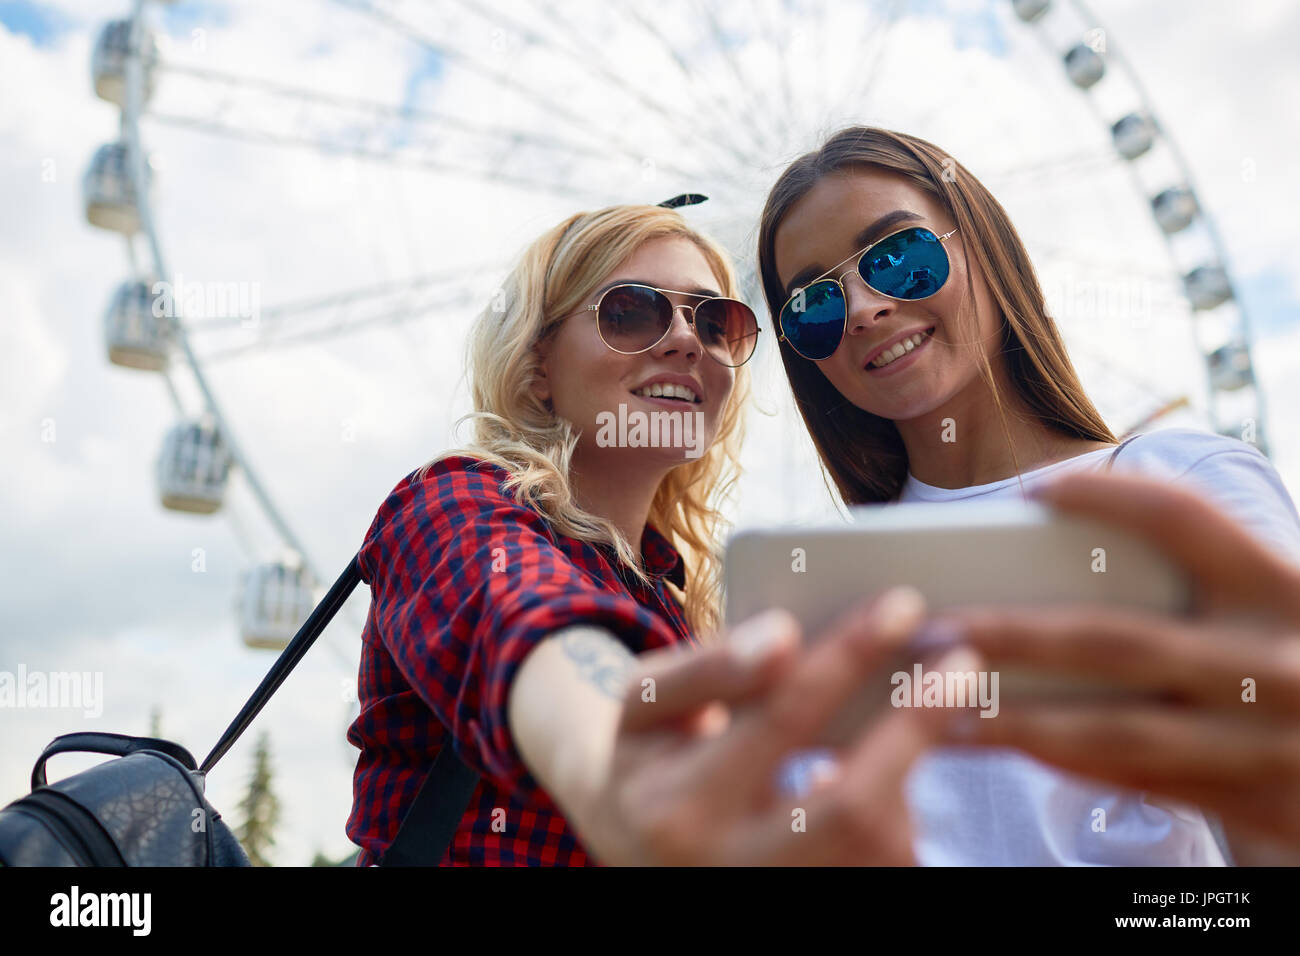 Portrait of two beautiful young girls taking selfie via smartphone camera standing against tall Ferris wheel in amusement park Stock Photo